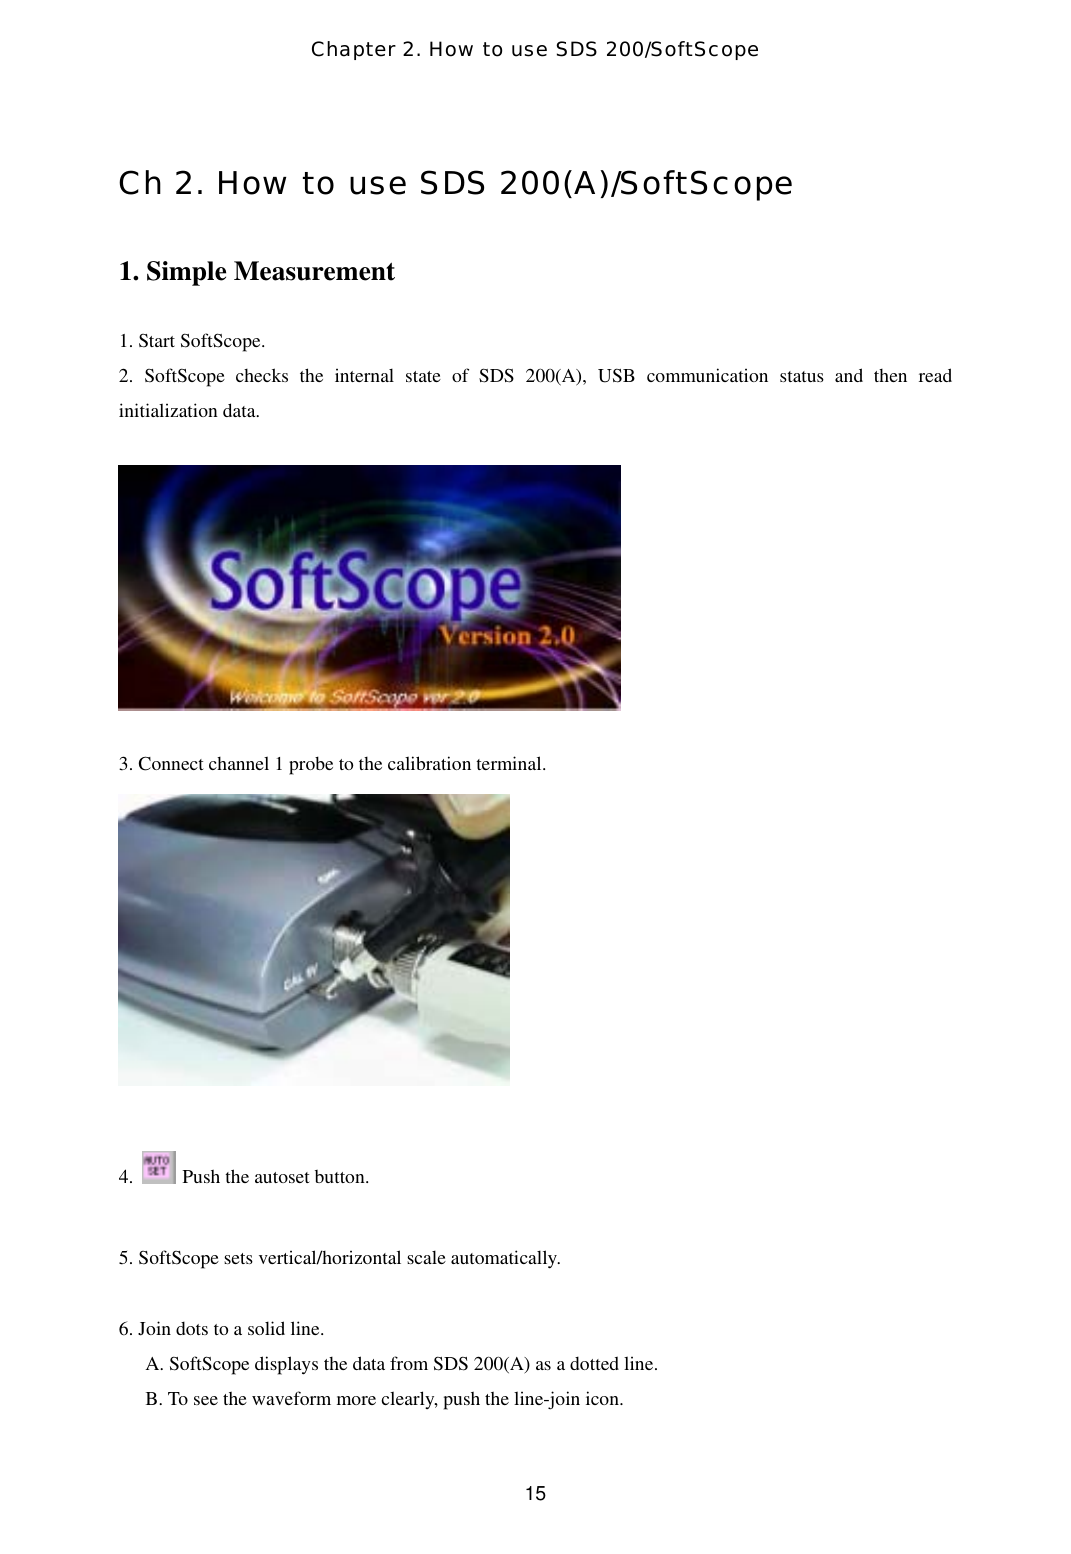 Chapter 2. How to use SDS 200/SoftScope  15Ch 2. How to use SDS 200(A)/SoftScope  1. Simple Measurement  1. Start SoftScope. 2. SoftScope checks the internal state of SDS 200(A), USB communication status and then read initialization data.    3. Connect channel 1 probe to the calibration terminal.   4.    Push the autoset button.    5. SoftScope sets vertical/horizontal scale automatically.  6. Join dots to a solid line. A. SoftScope displays the data from SDS 200(A) as a dotted line. B. To see the waveform more clearly, push the line-join icon.   